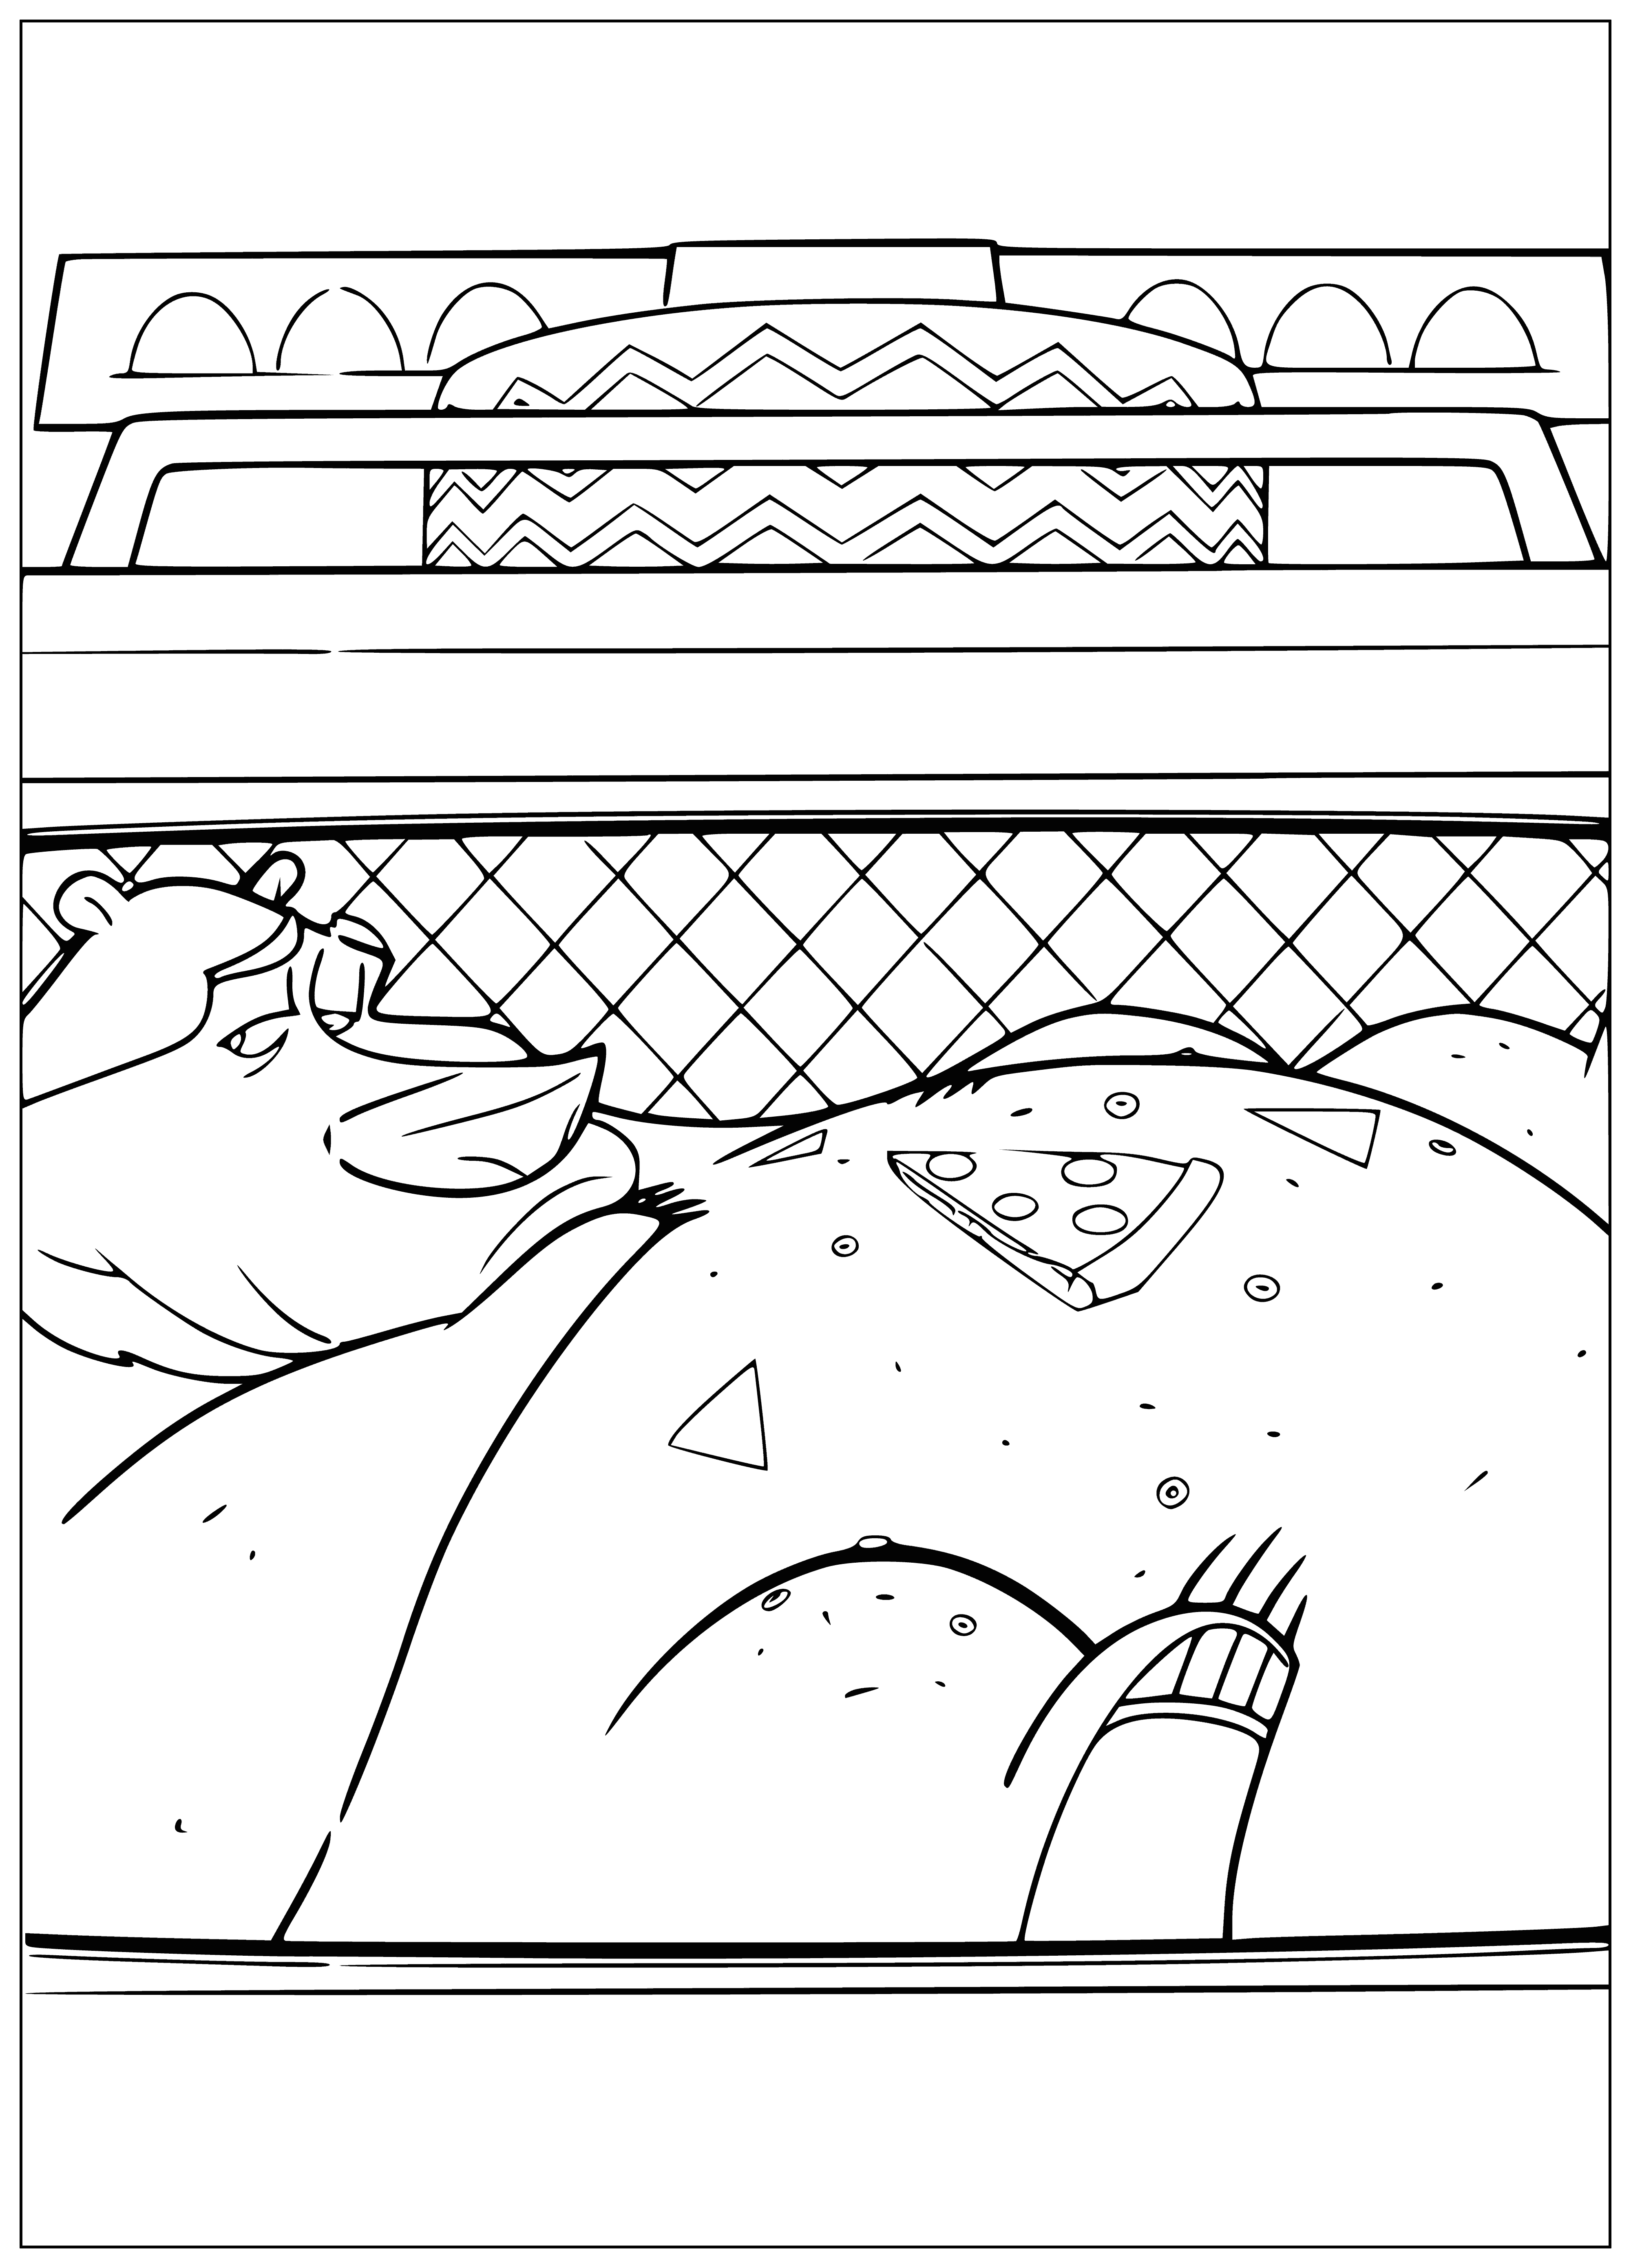 Bear arrested coloring page